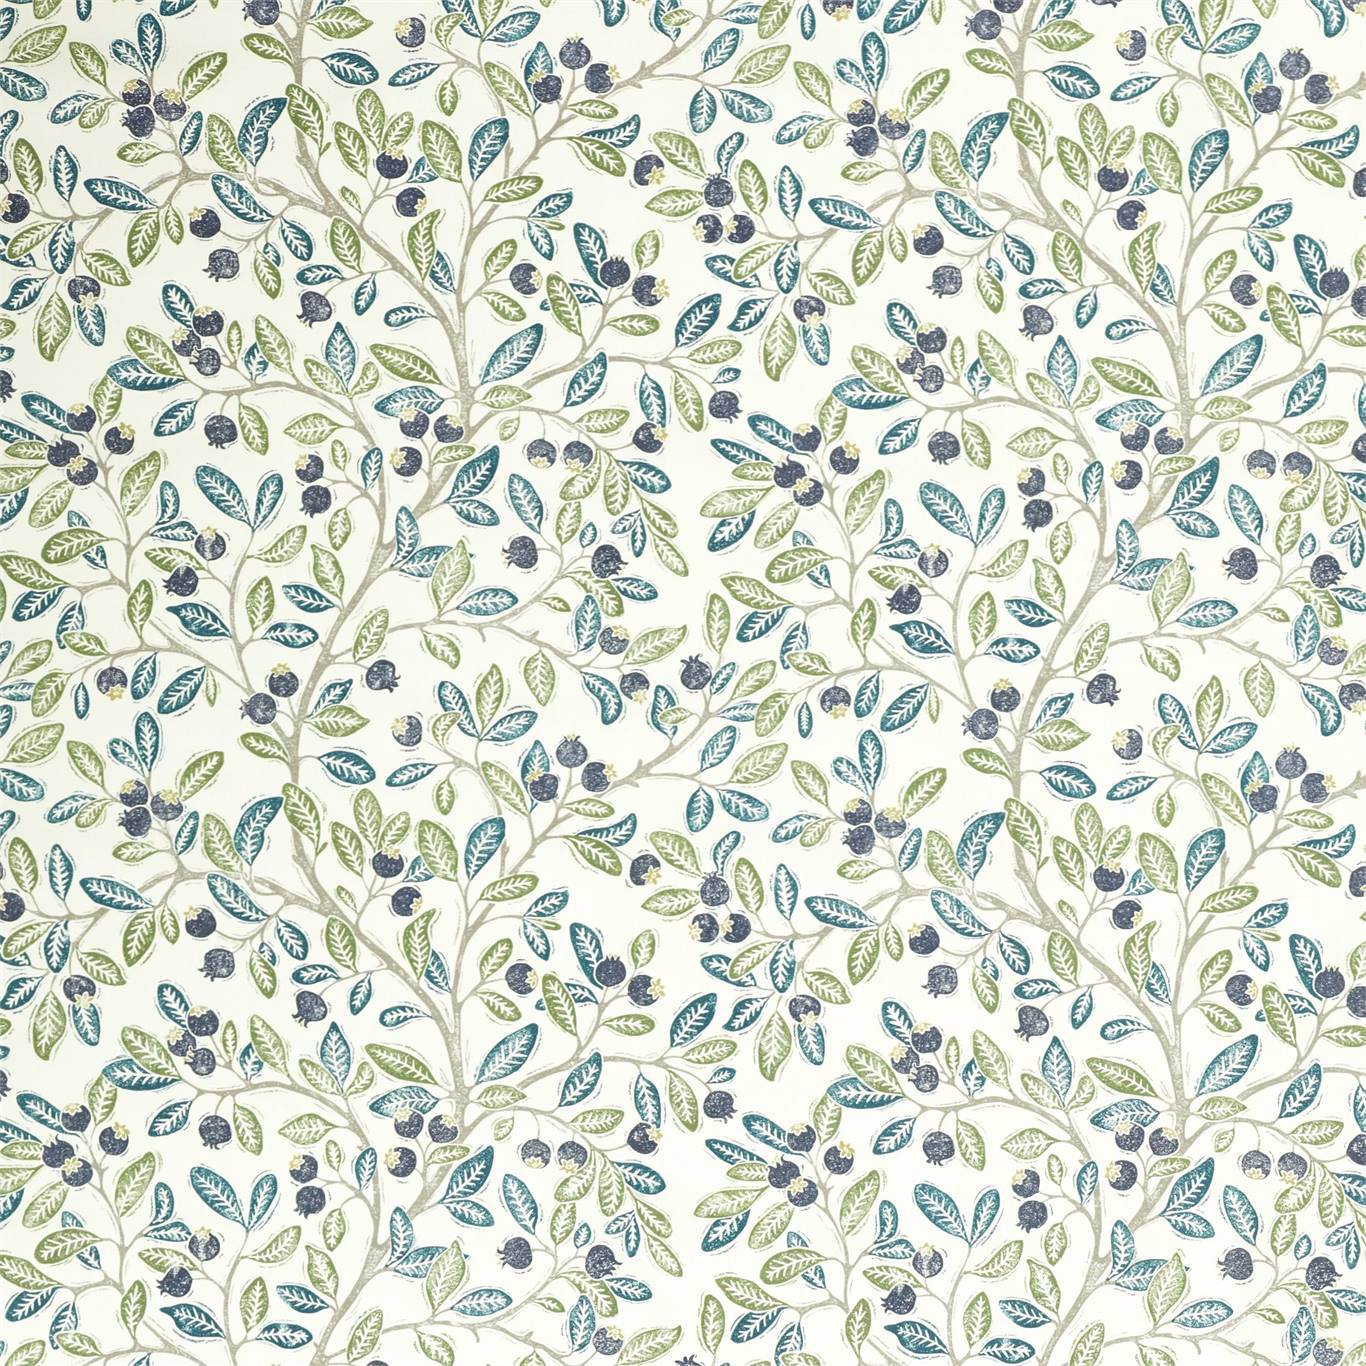 Wild Berries Blueberry/Sage Fabric by SAN